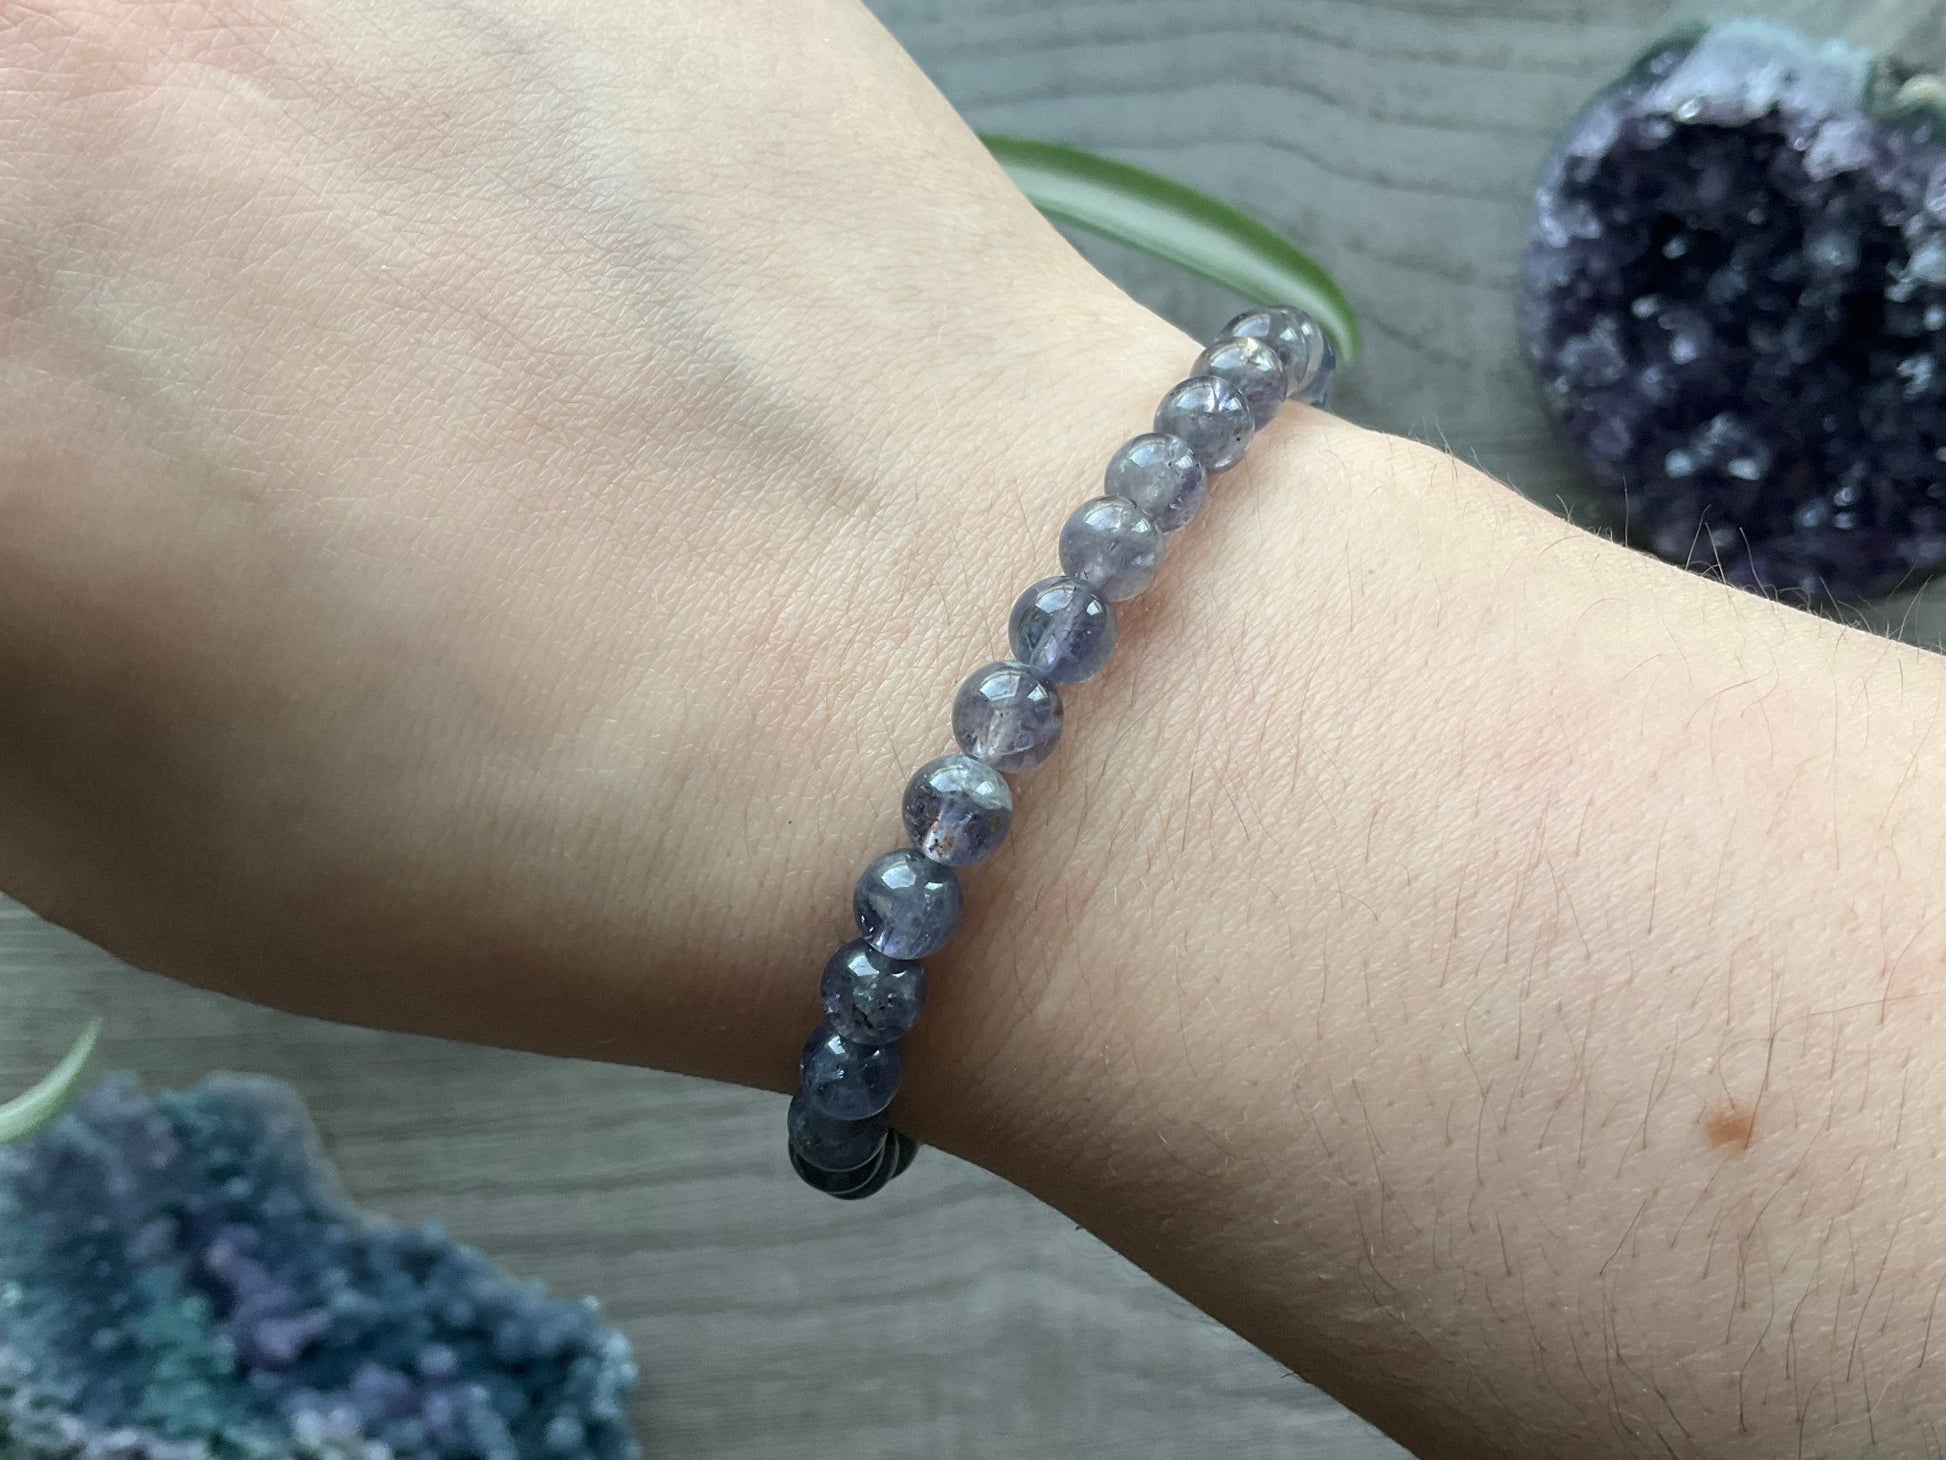 Pictured is an iolite bracelet.